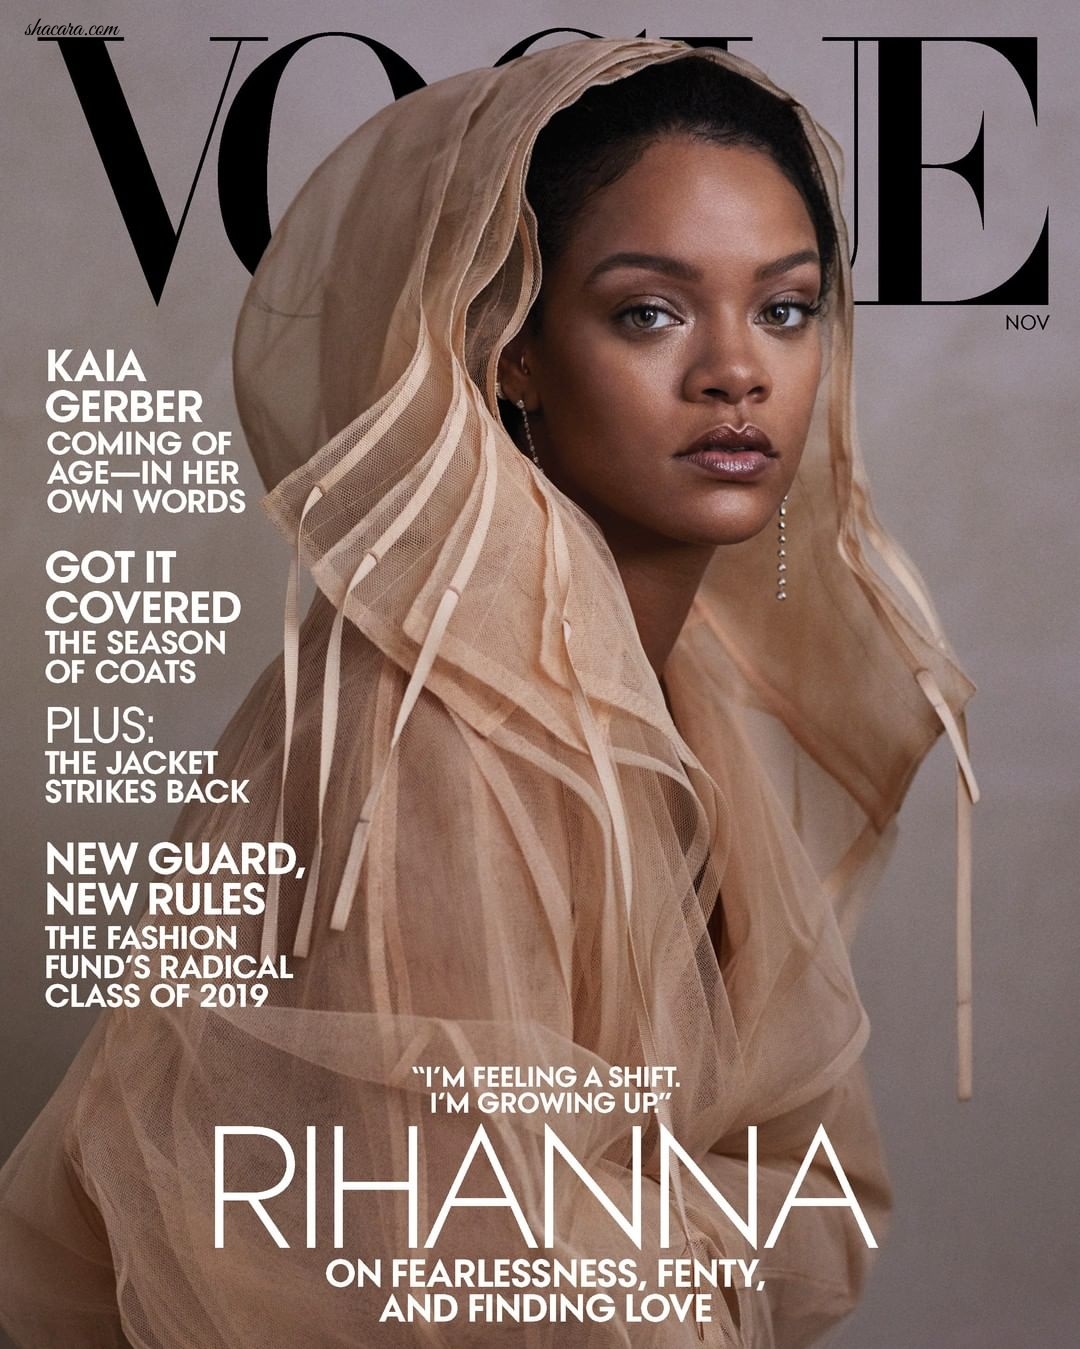 Rihanna Is Breathtaking On The Cover of Vogue Magazine’s November Issue